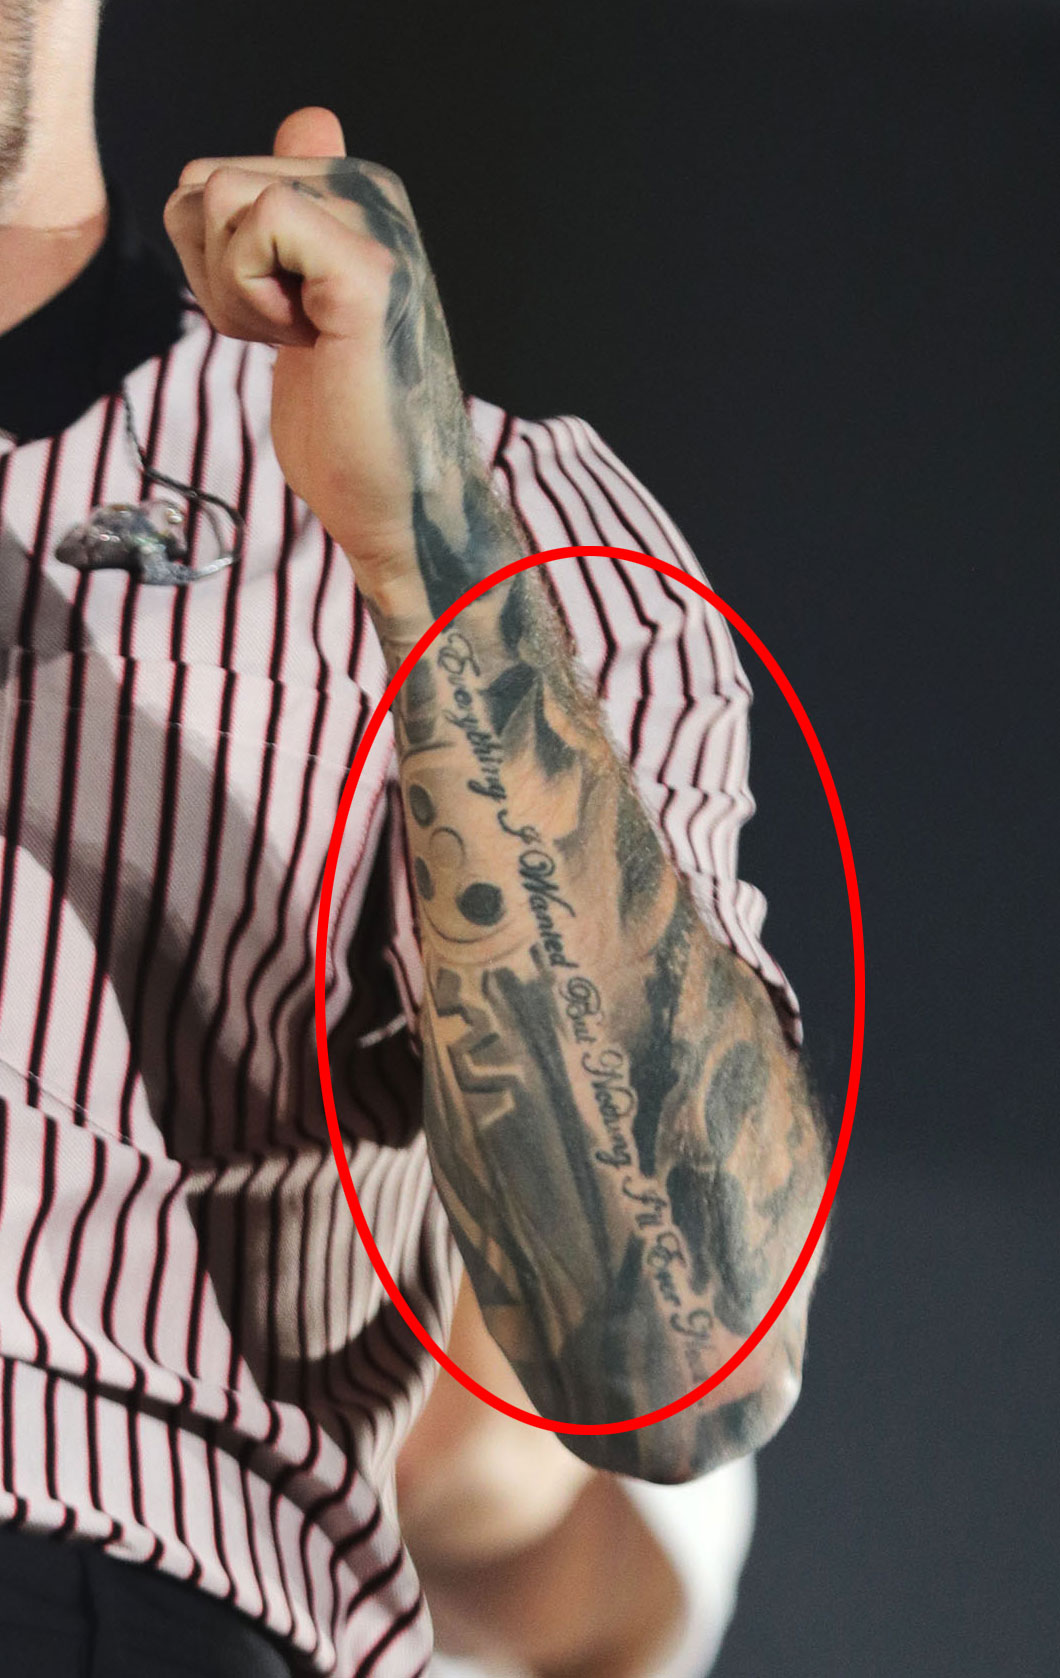 Liam Payne Tattoo Photos: Guide to Ink Designs, Their Meanings | J-14